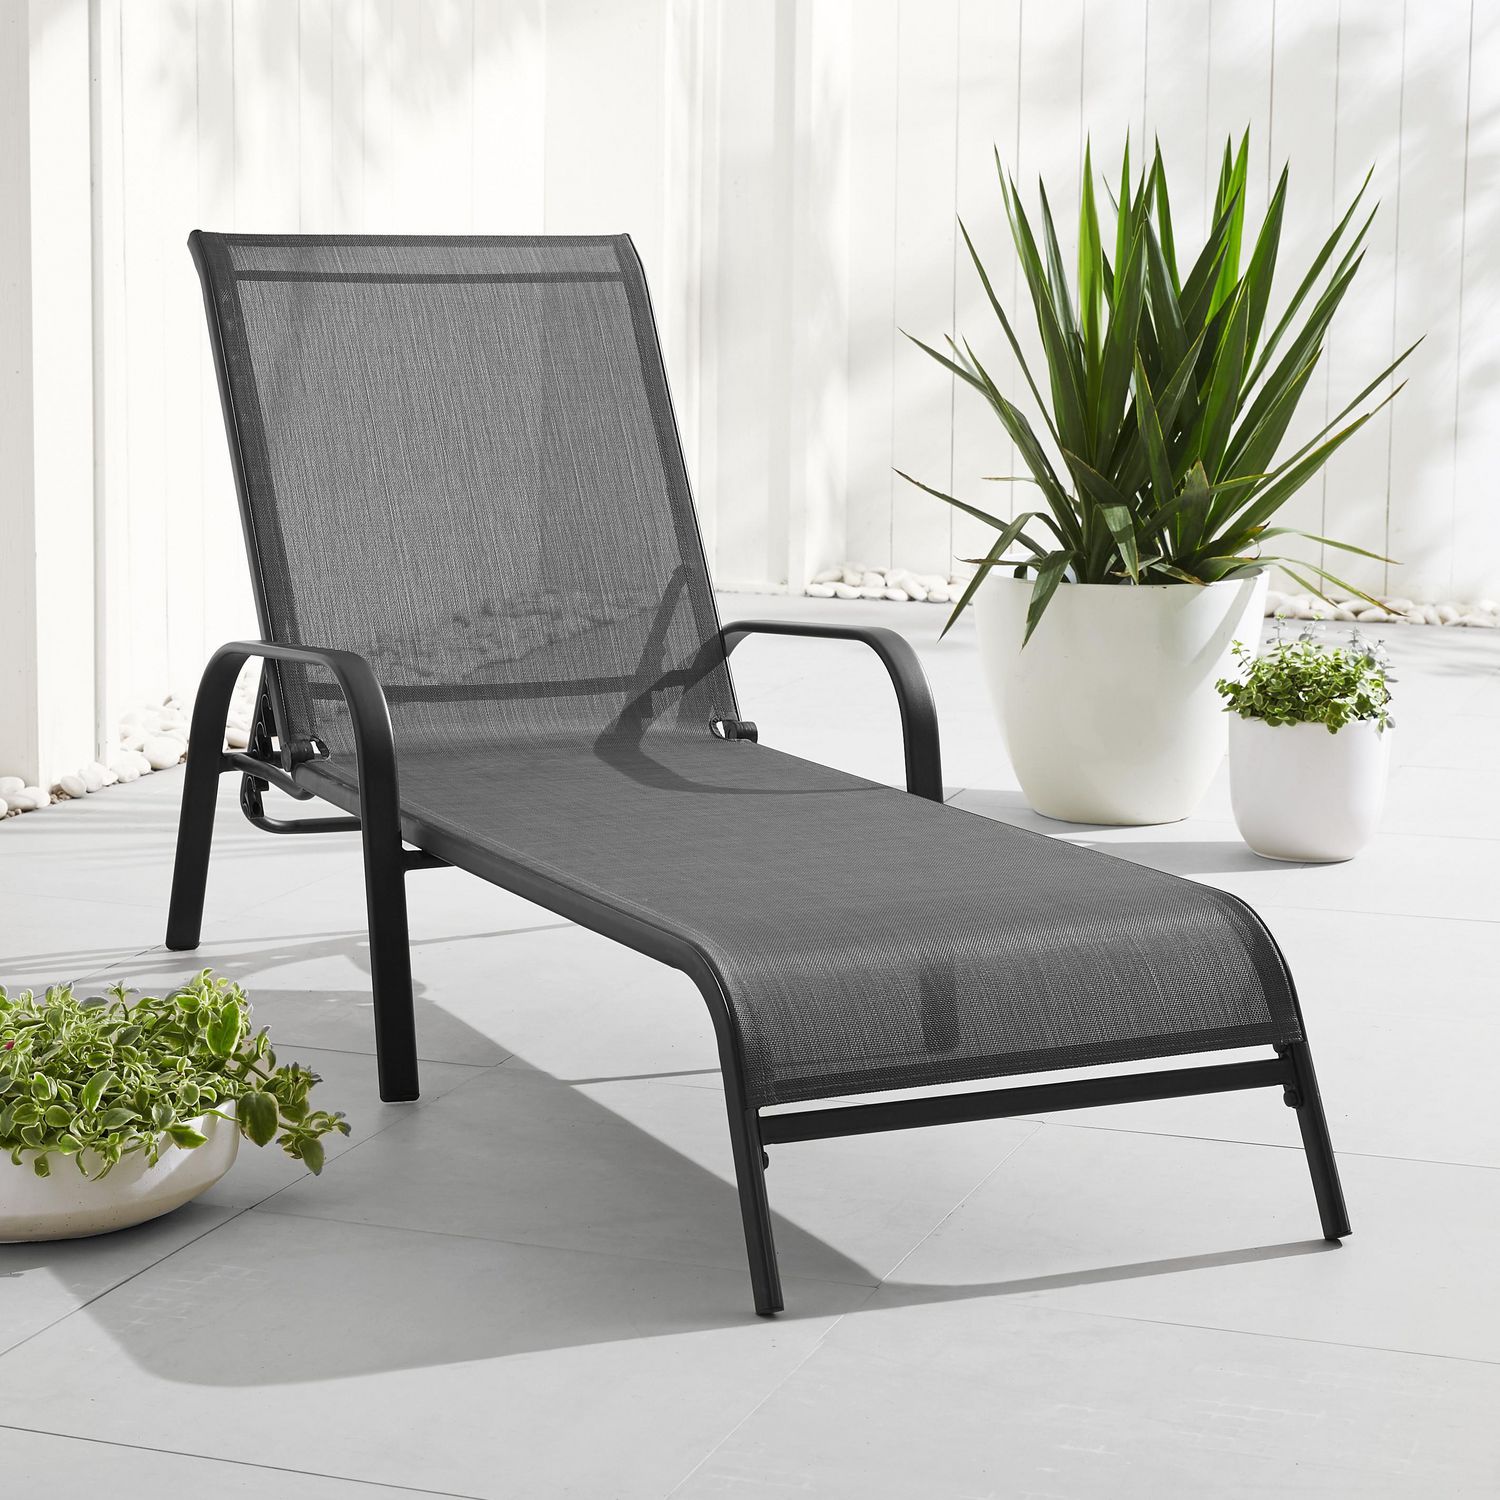 Mainstays Stacking Sling Lounger Walmart Canada